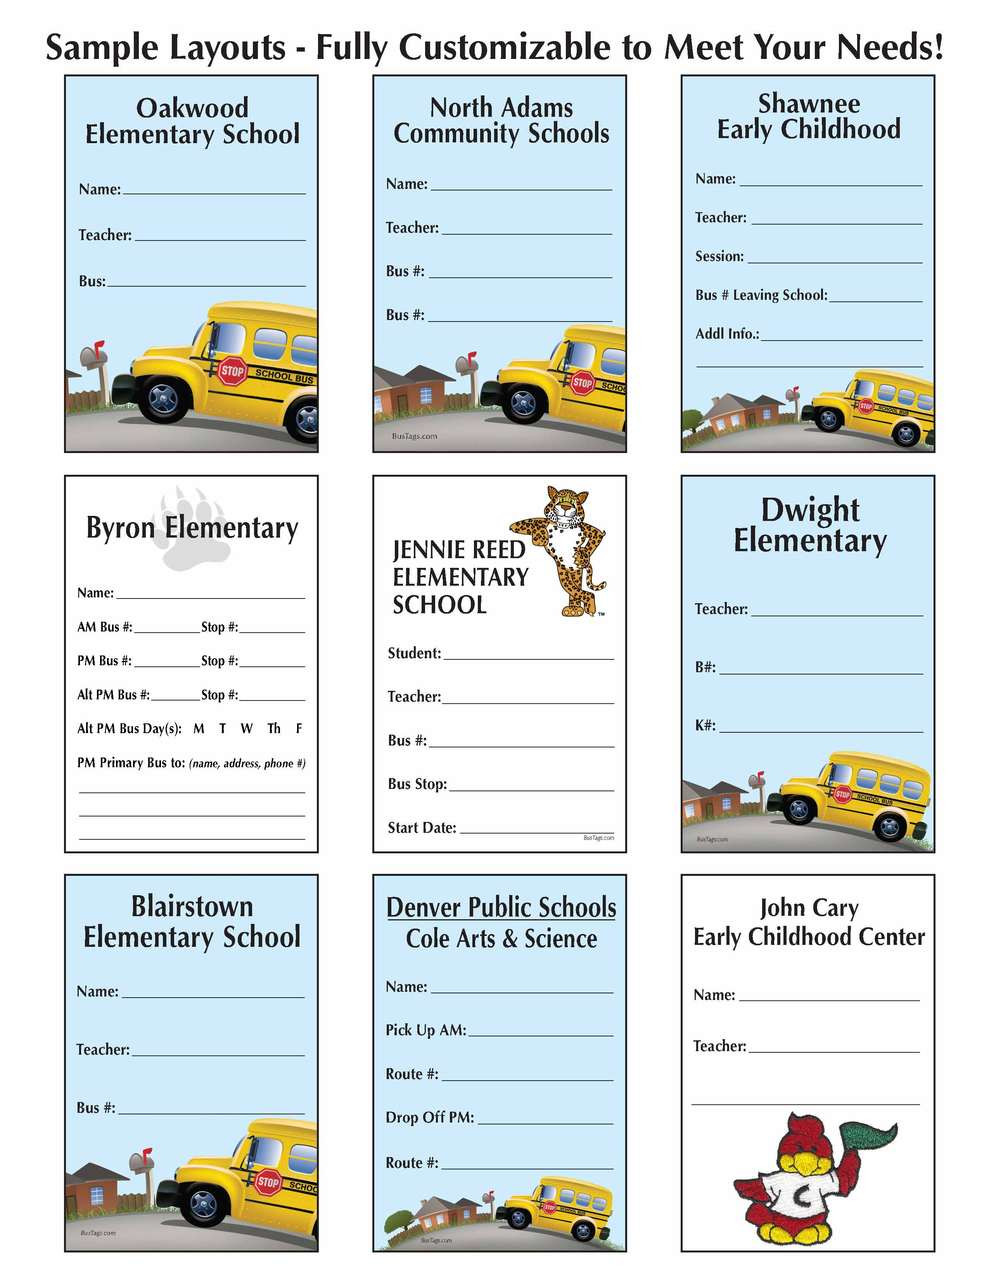 Bus Tag / Student ID Tags Custom Layout NationalSchoolForms com